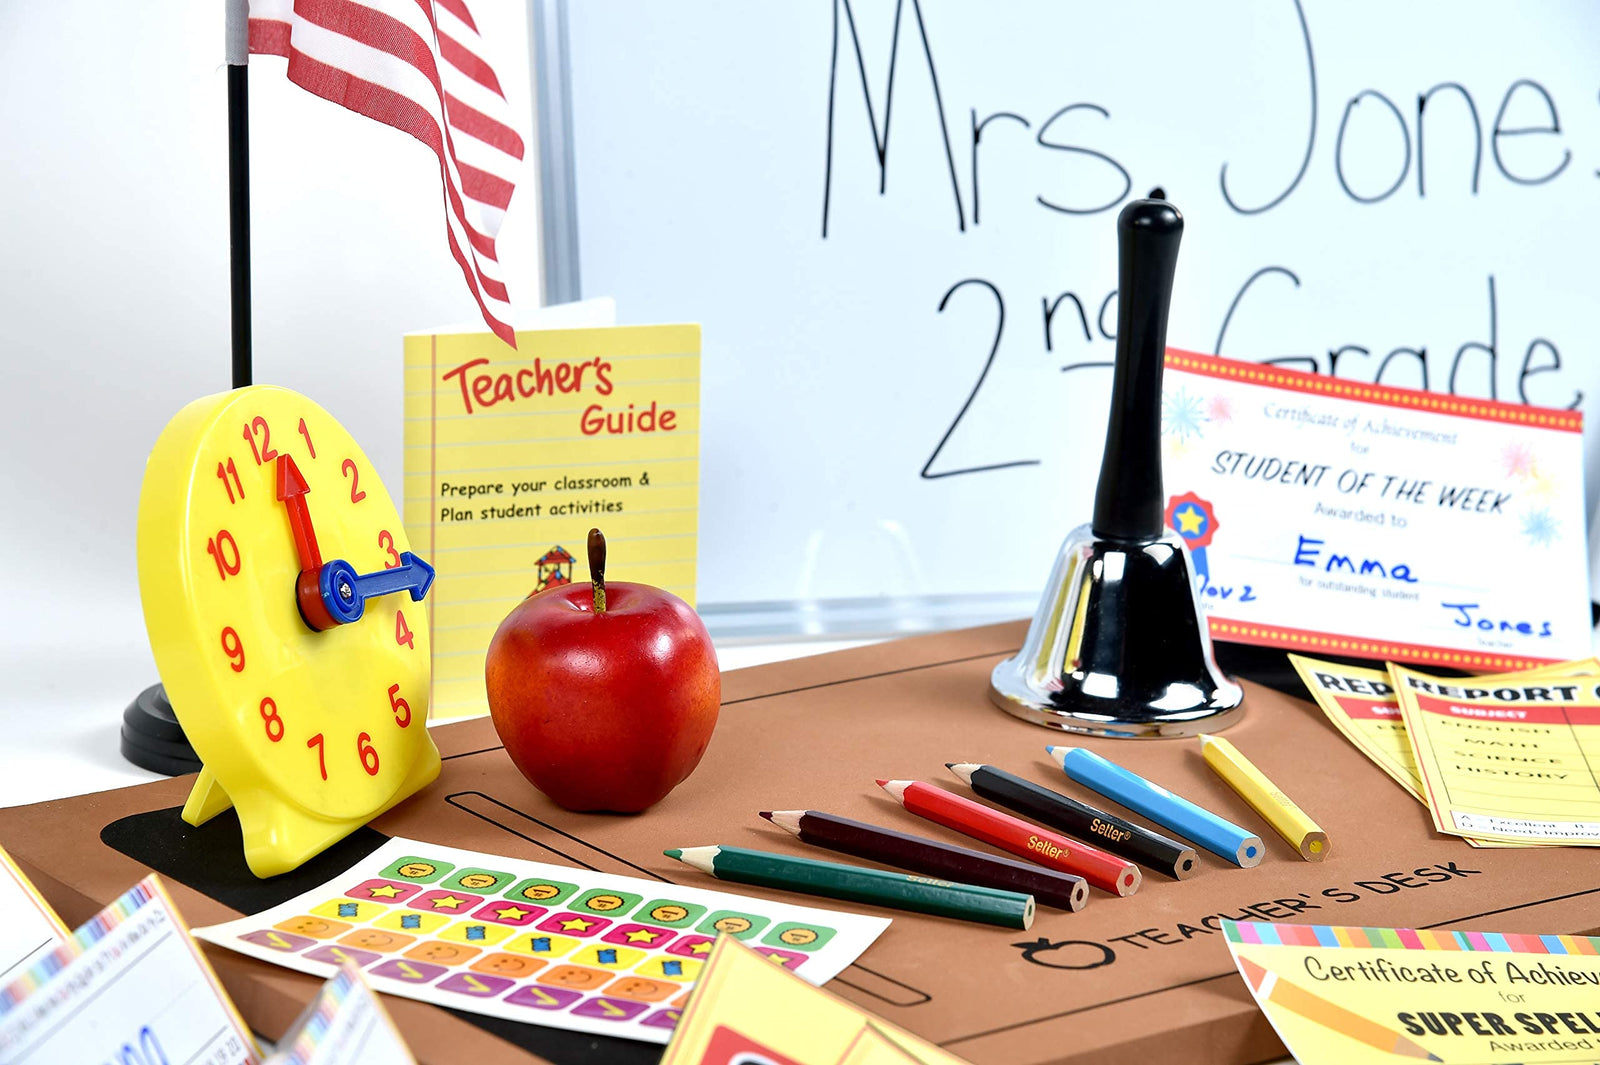 Ben Franklin Toys Play Teacher Role-Play Set Includes Reusable White Board, Bell, Report Cards, for Home or Classroom